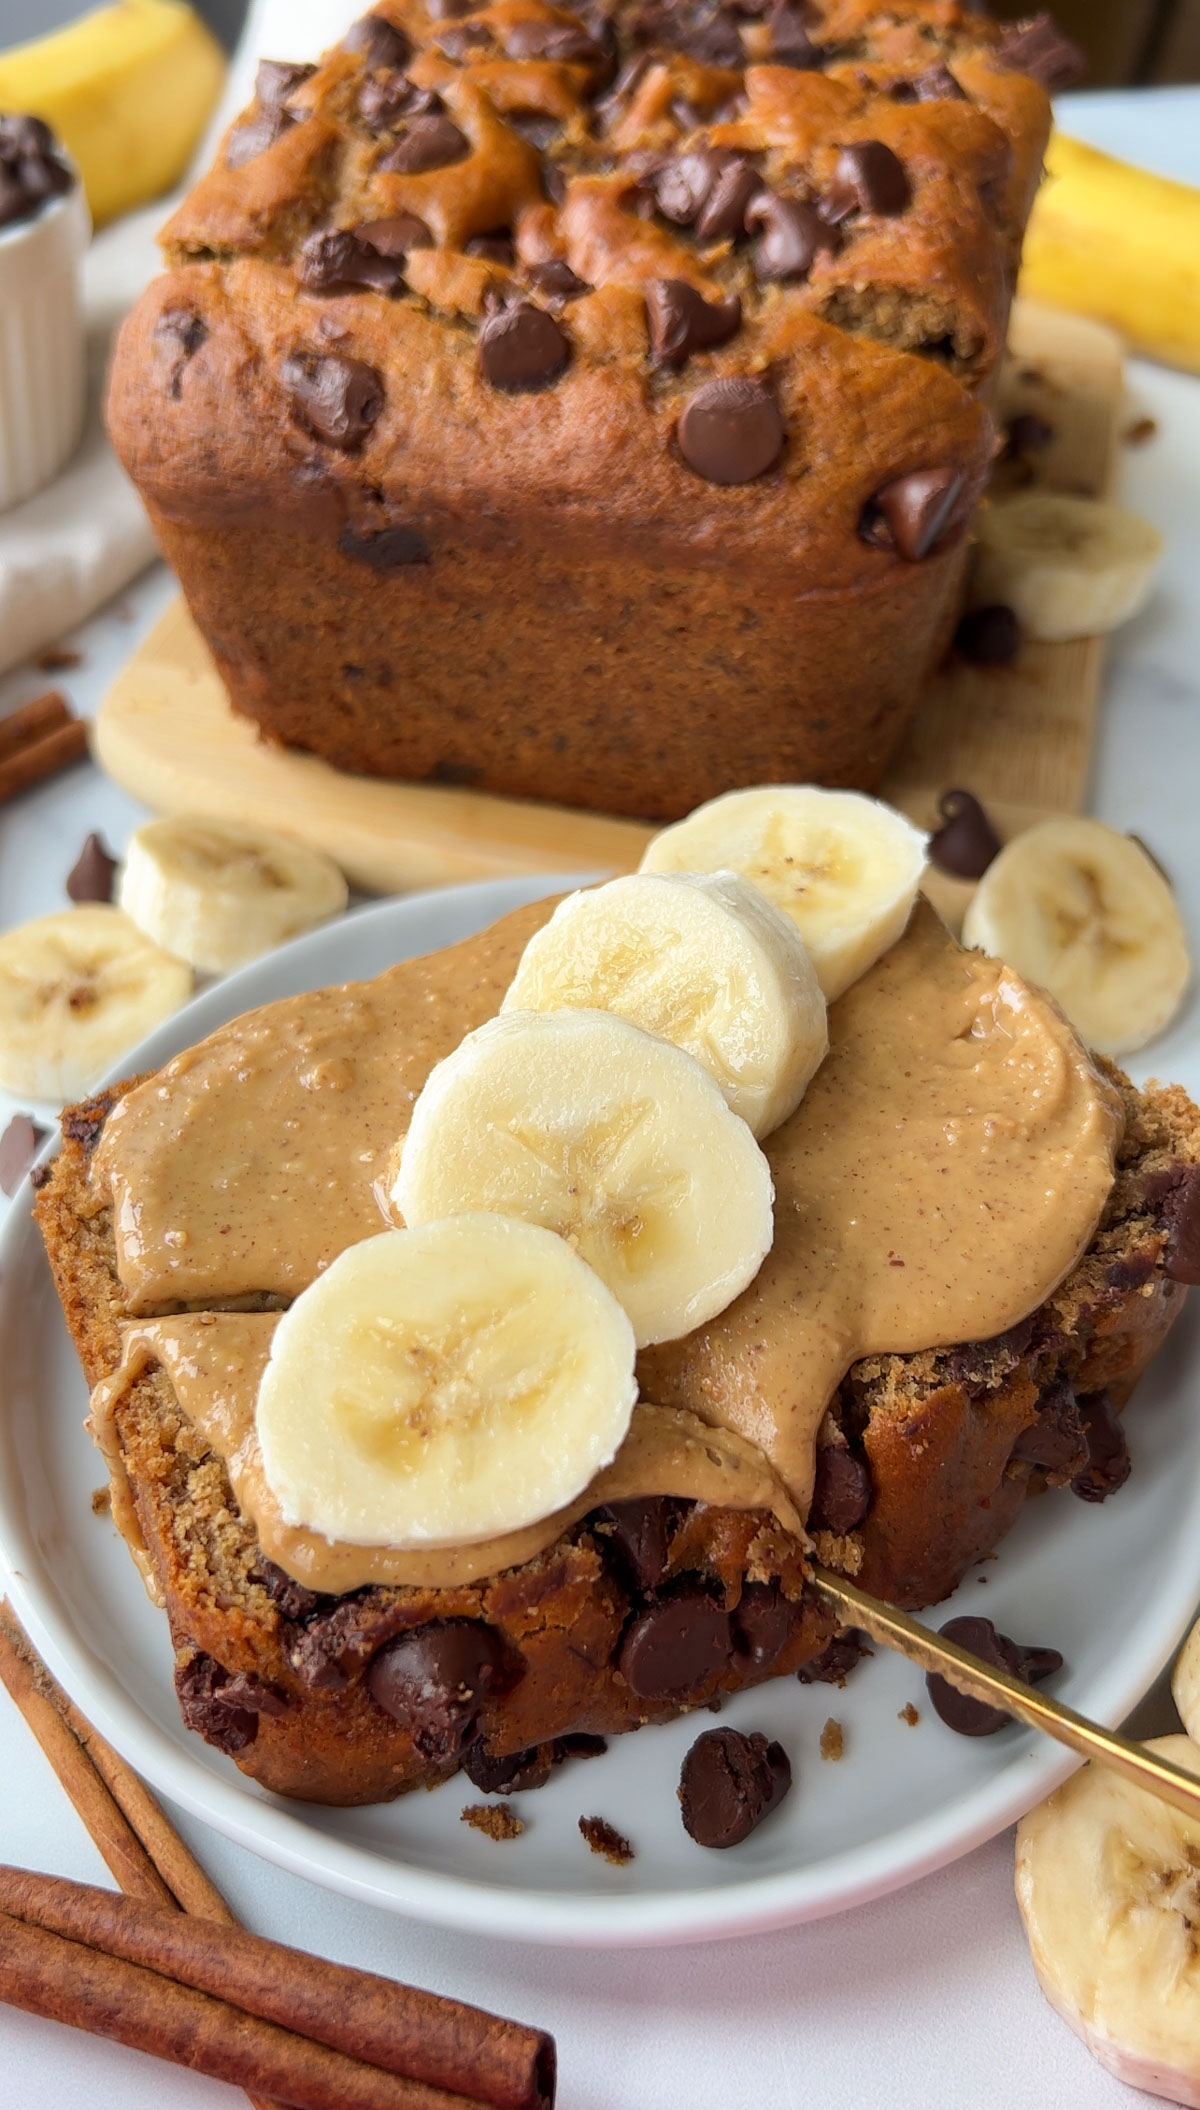 chocolate chip banana bread with peanut butter and banana slices on top